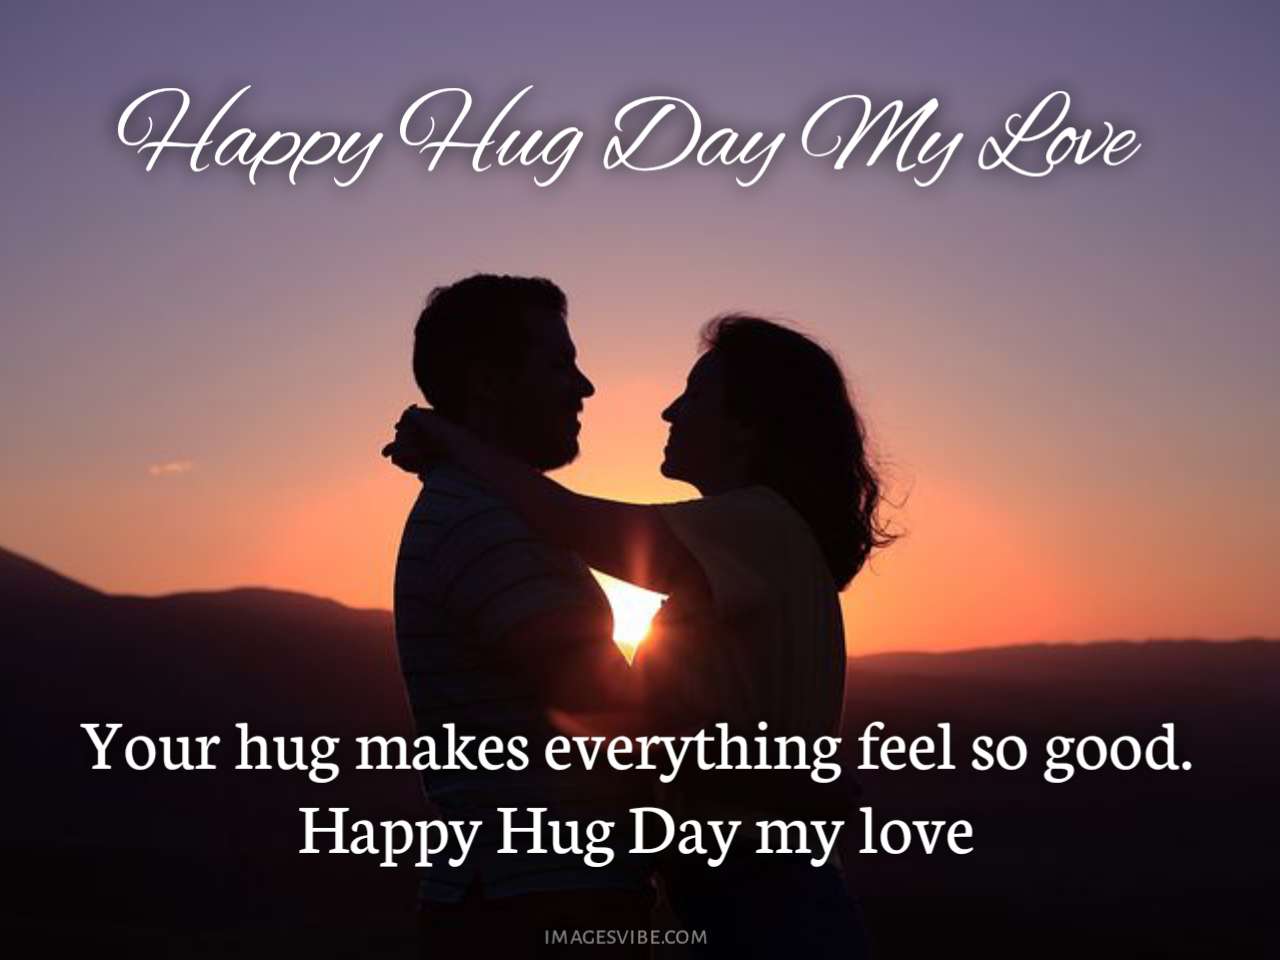 Best 30+ Happy Hug Day Images Wishes In 2023 - Images Vibe